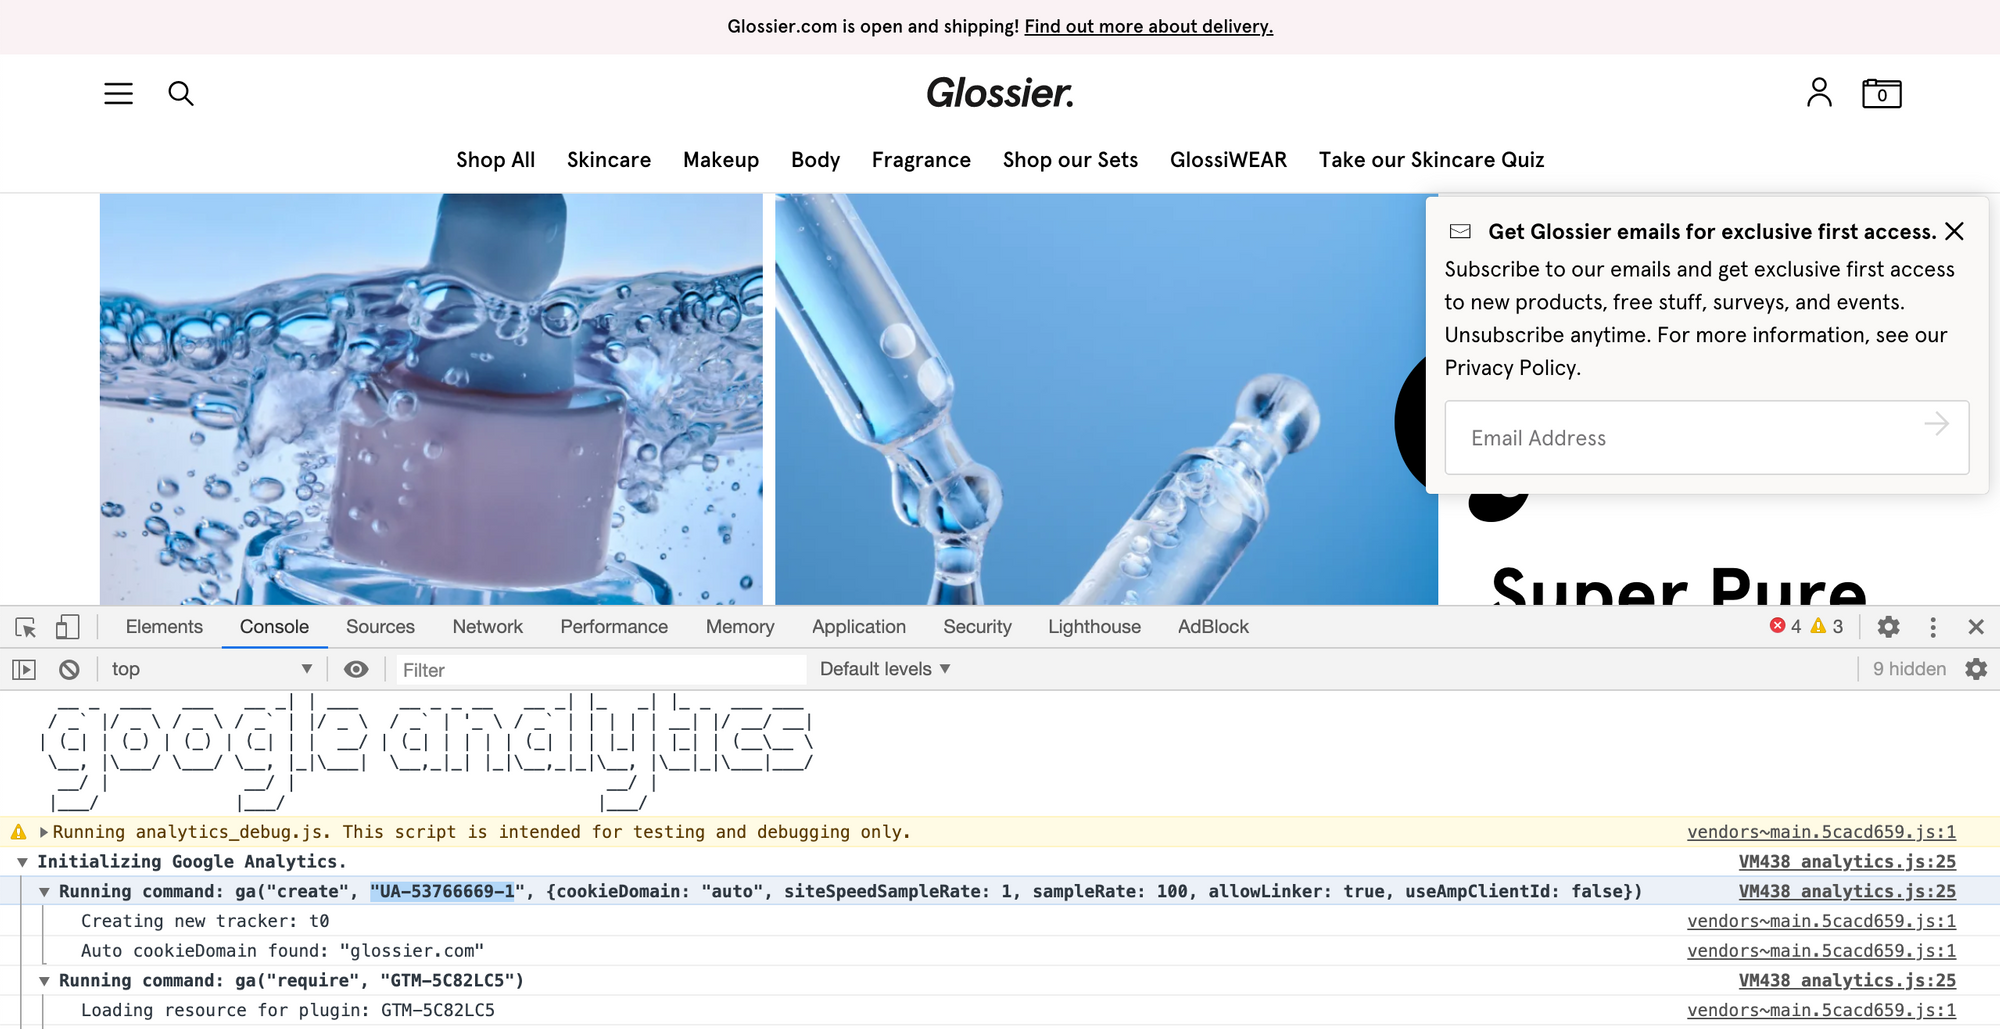 The Google Analytics tracking ID for glossier.com